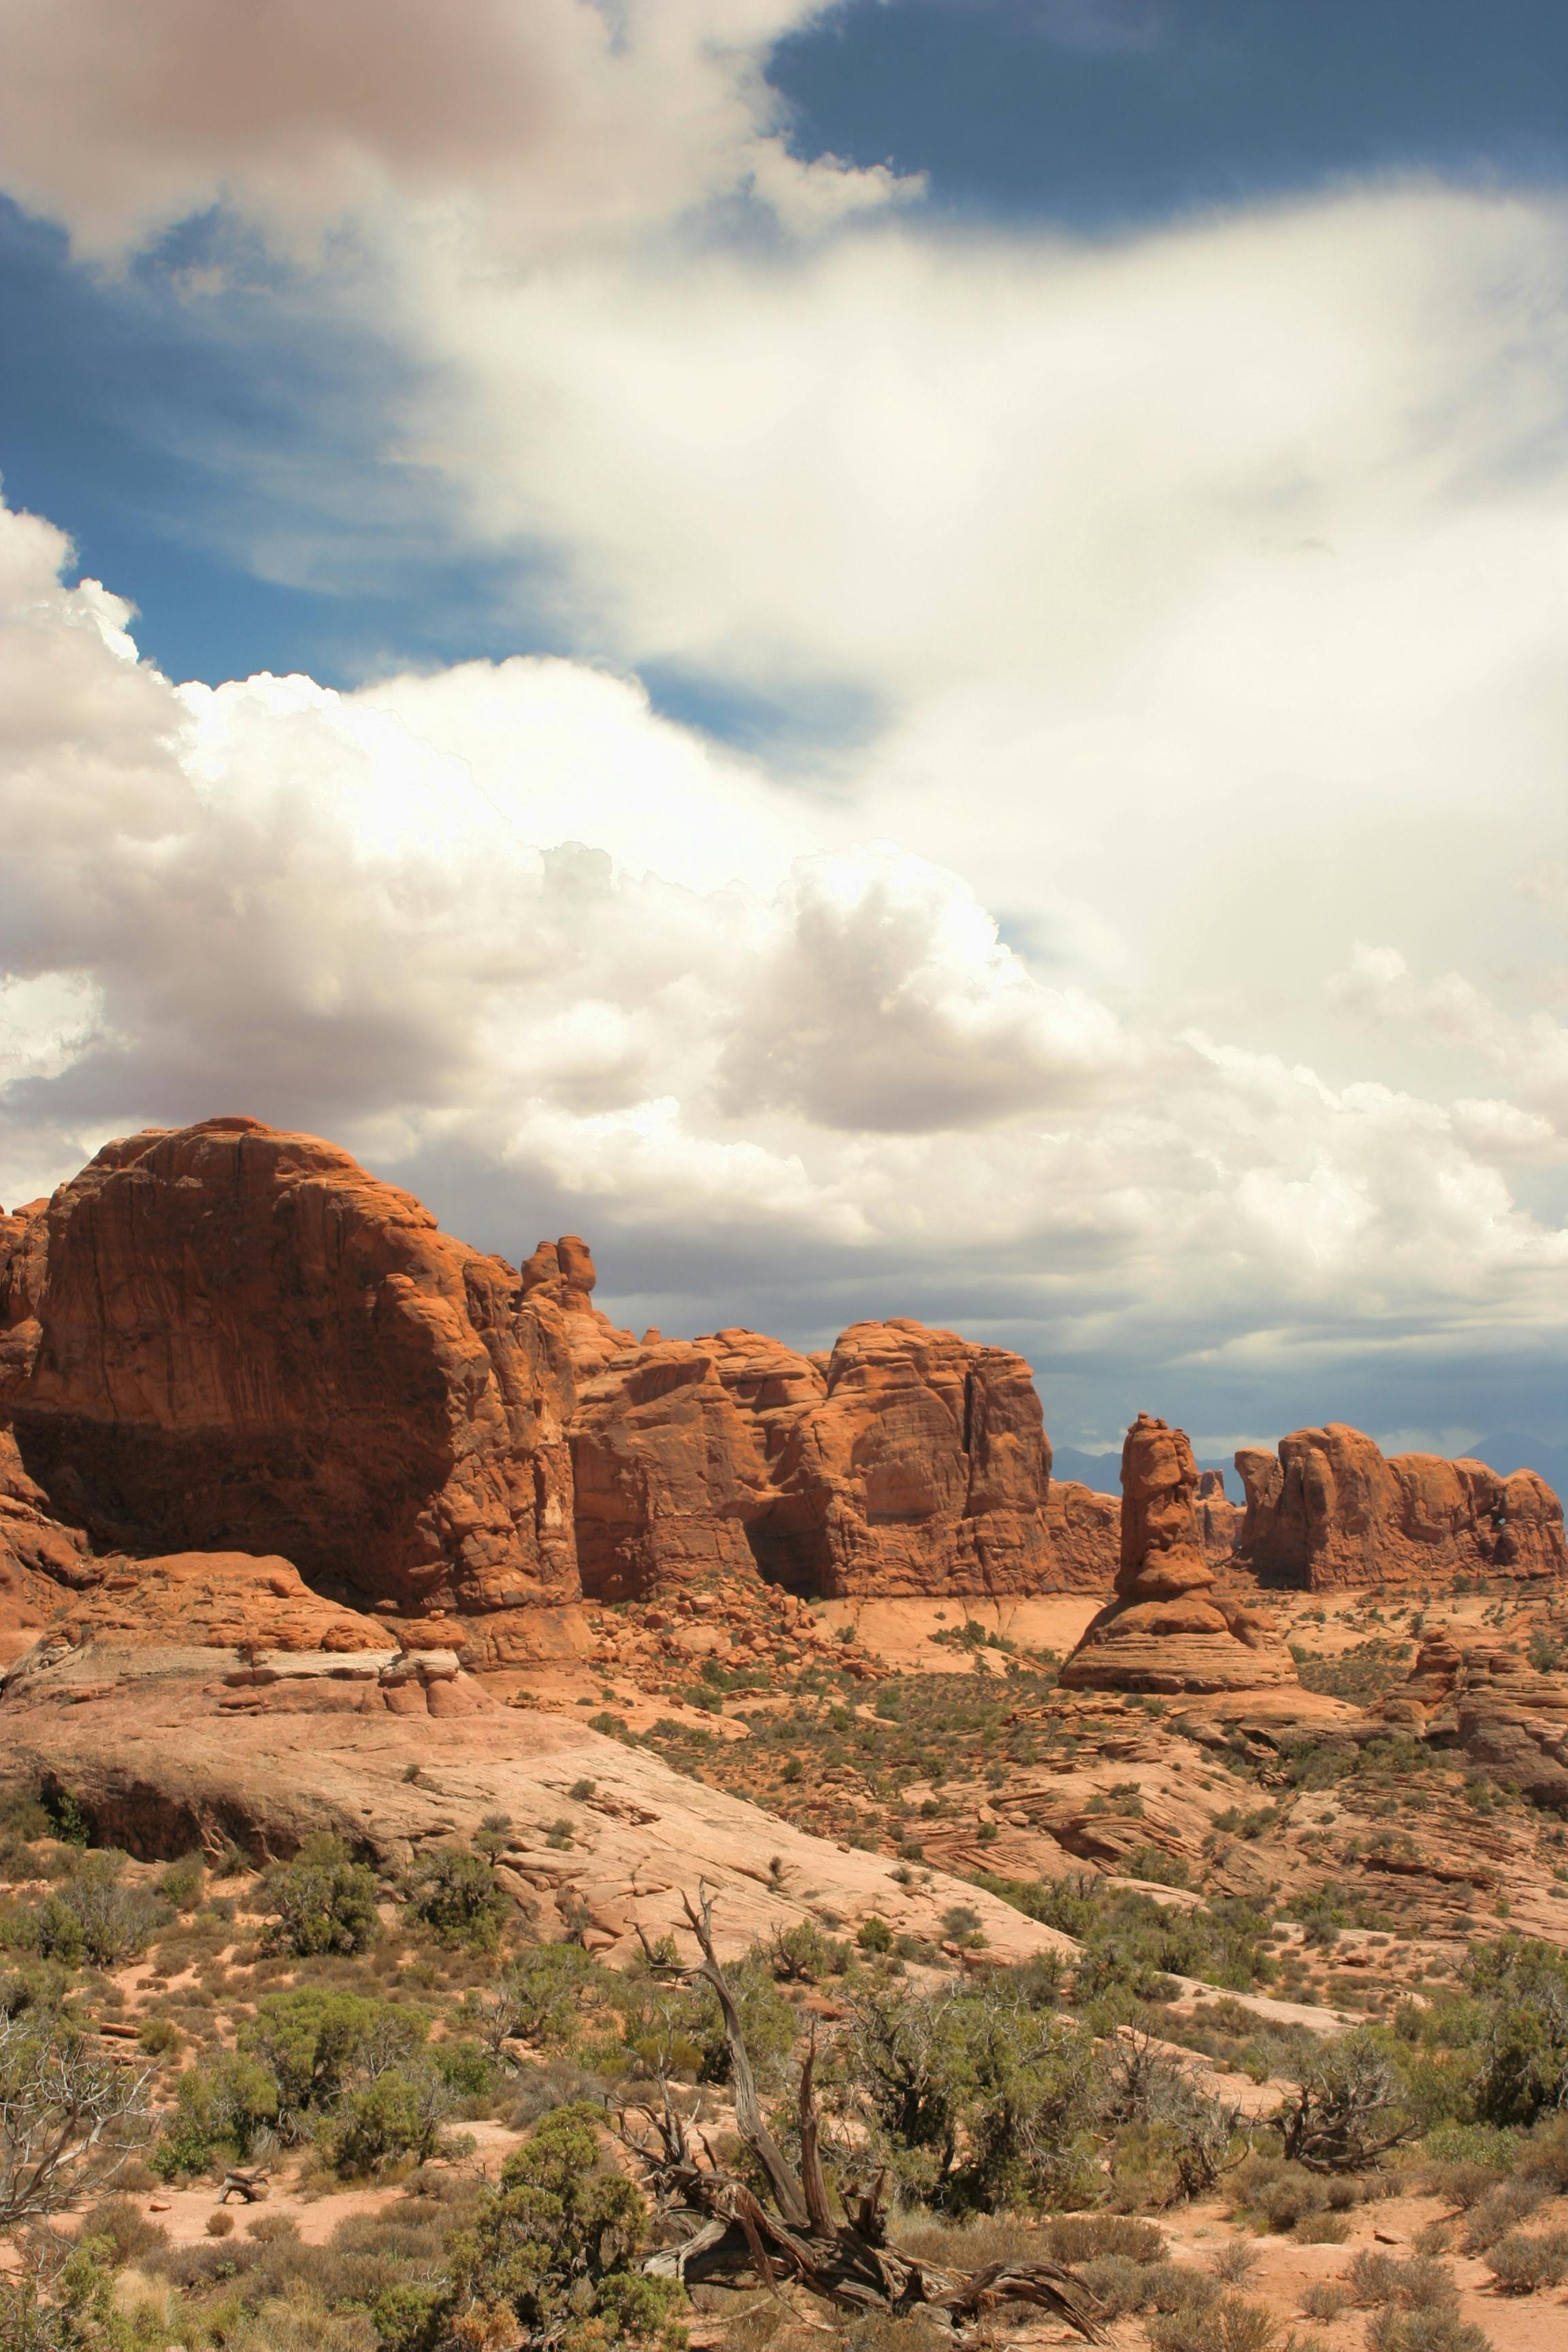 Free stock photo of clouds, desert, rock formations